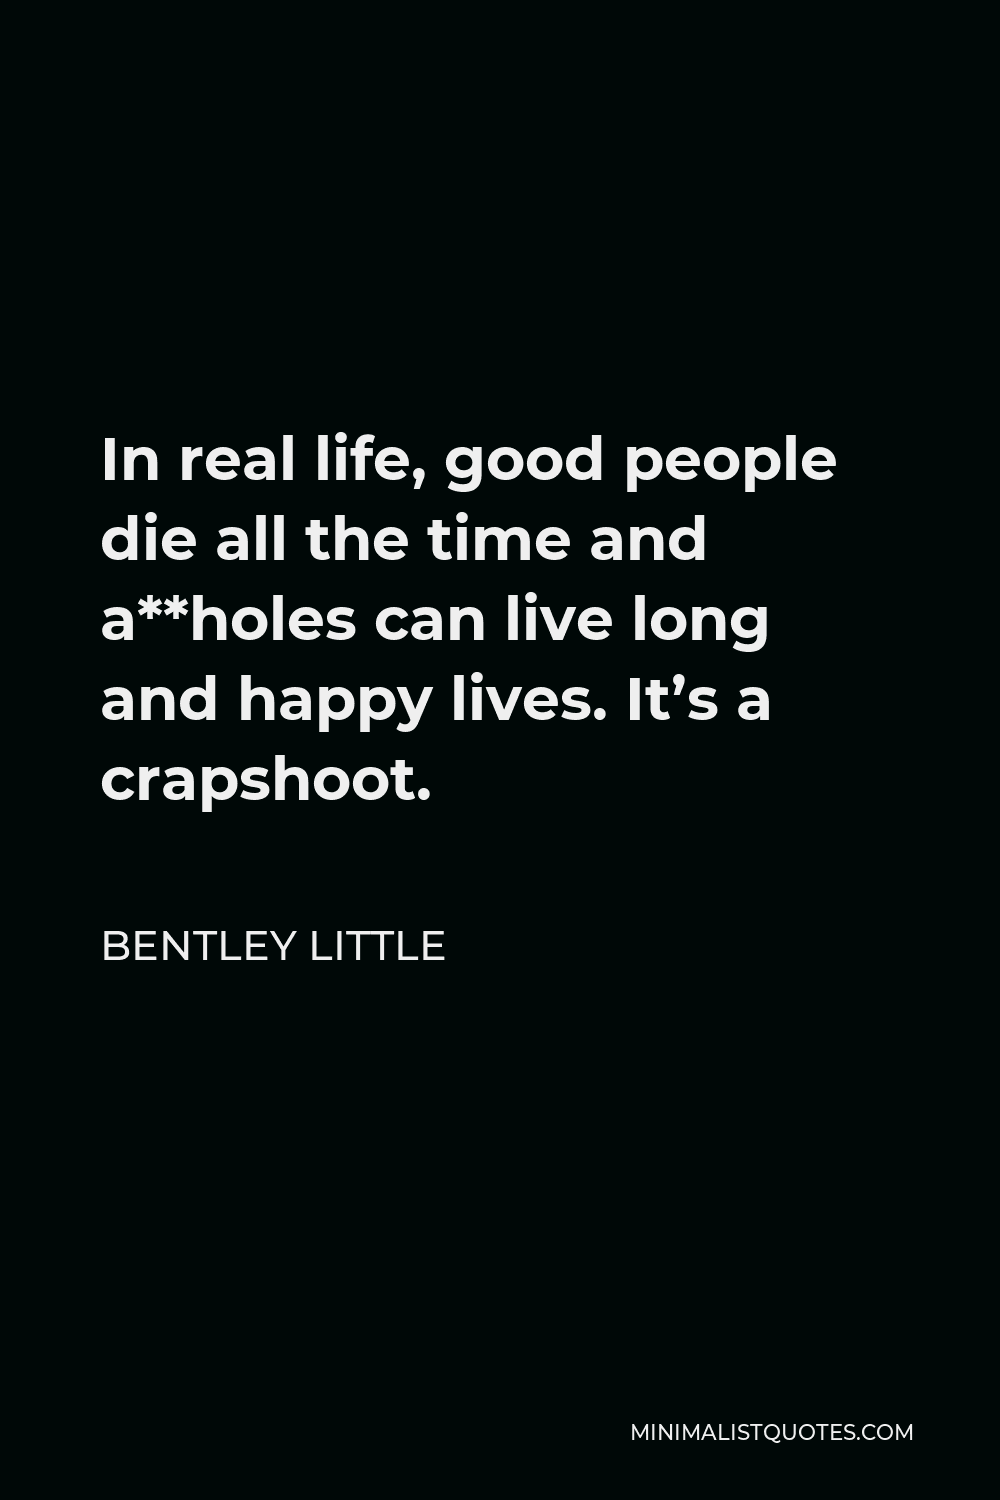 Bentley Little Quote - In real life, good people die all the time and a**holes can live long and happy lives. It’s a crapshoot.